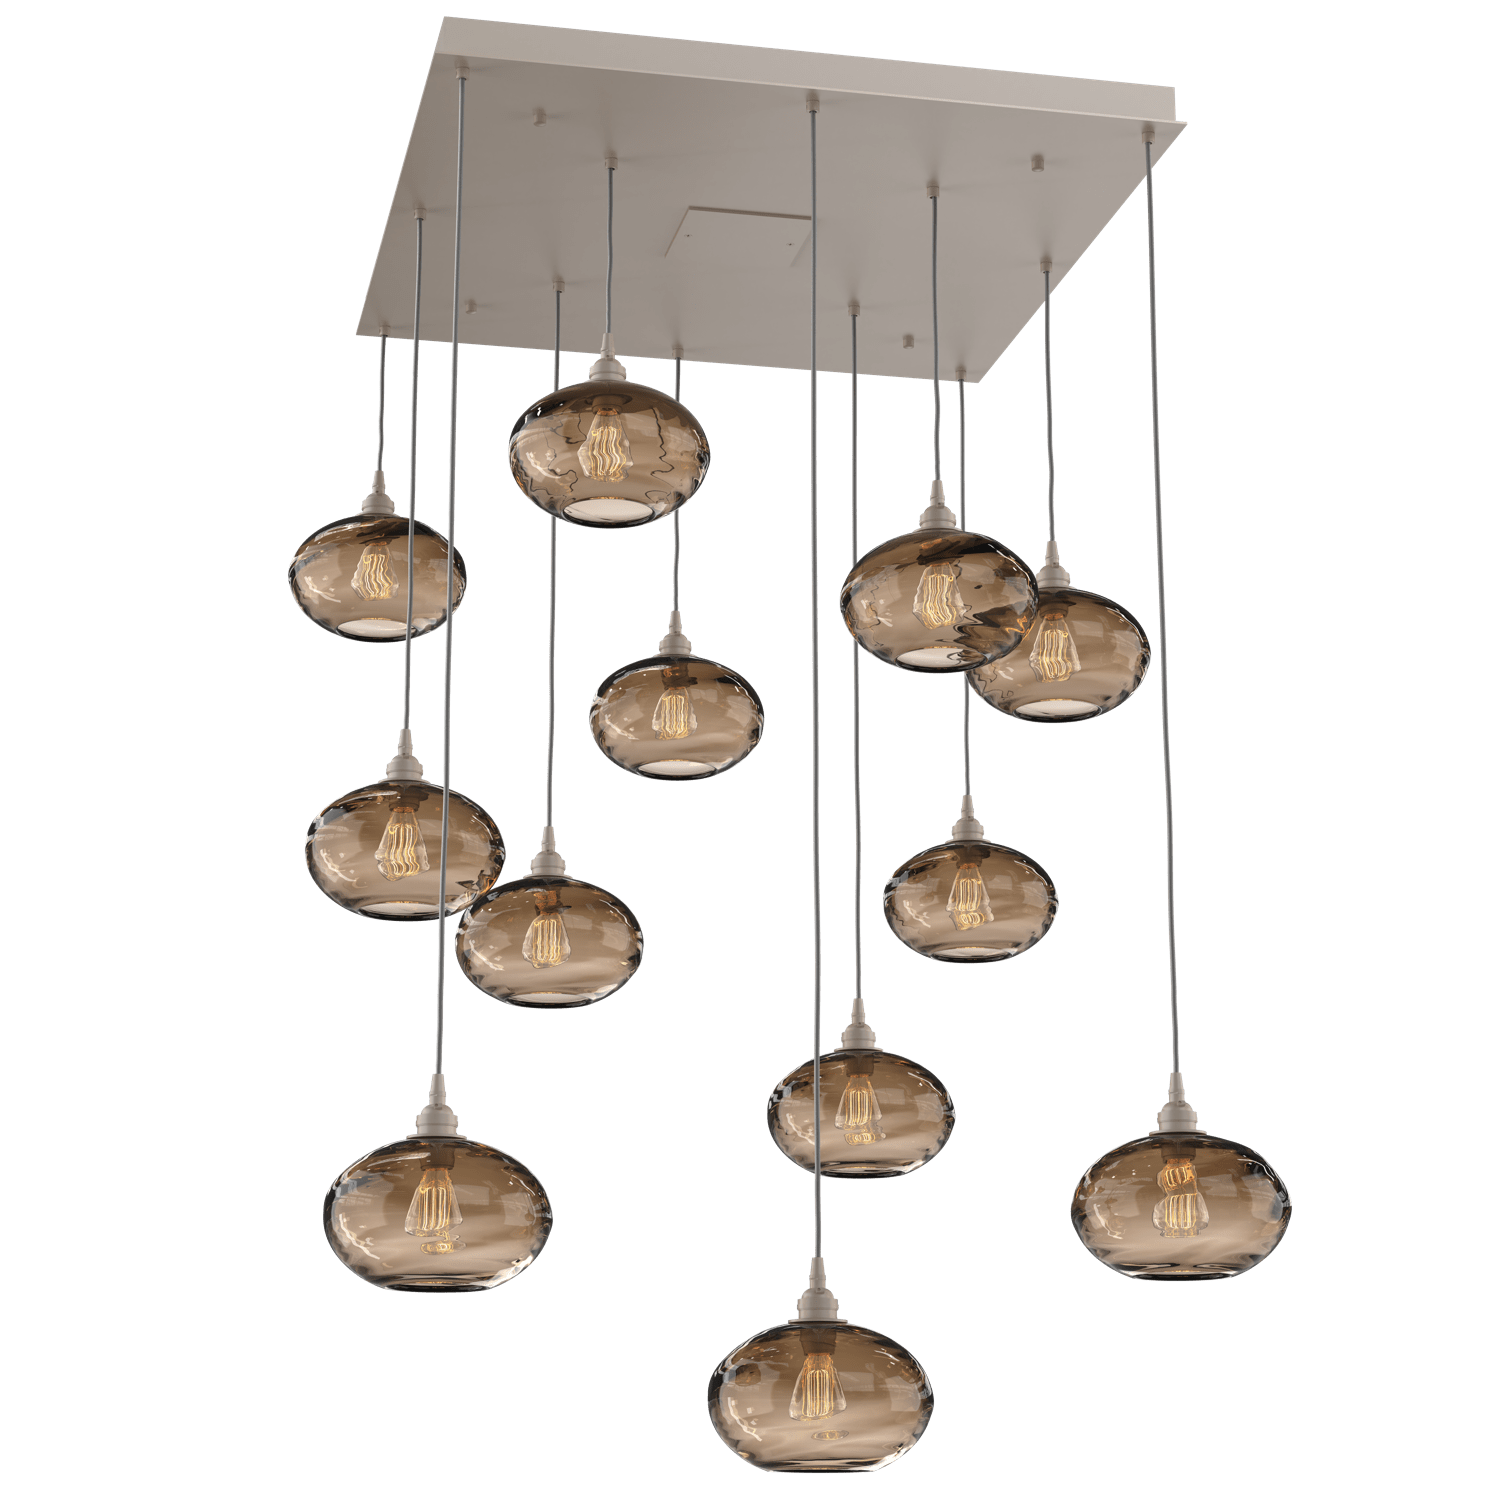 CHB0036-12-BS-OB-Hammerton-Studio-Optic-Blown-Glass-Coppa-12-light-square-pendant-chandelier-with-metallic-beige-silver-finish-and-optic-bronze-blown-glass-shades-and-incandescent-lamping